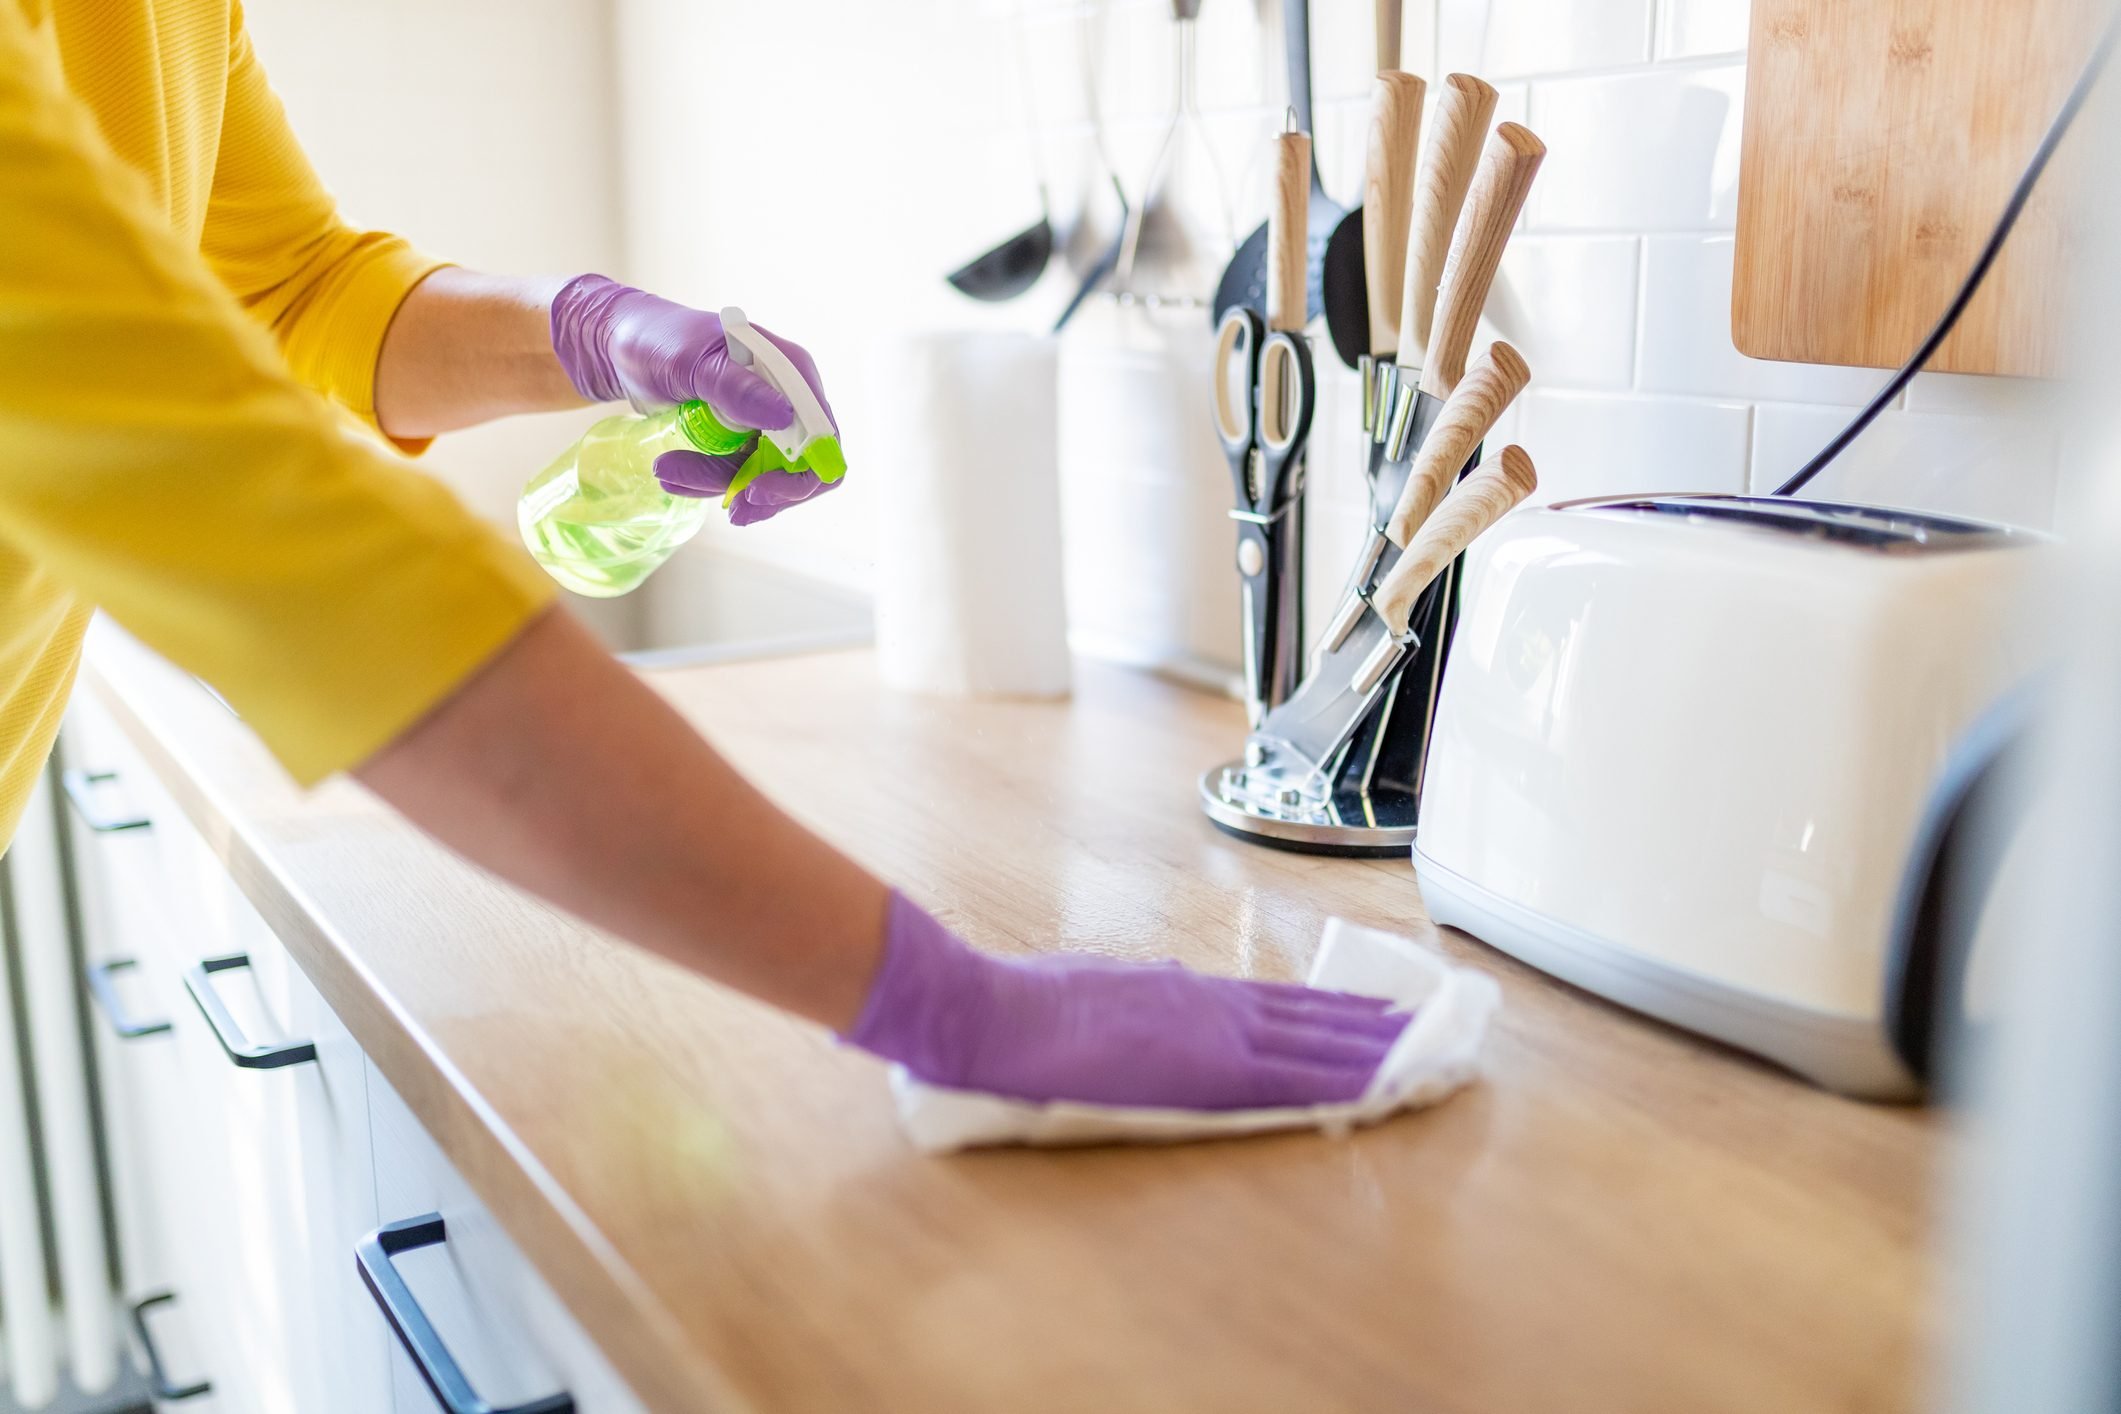 15 Cleaning Tips from Professional Cleaners - Pristine Home